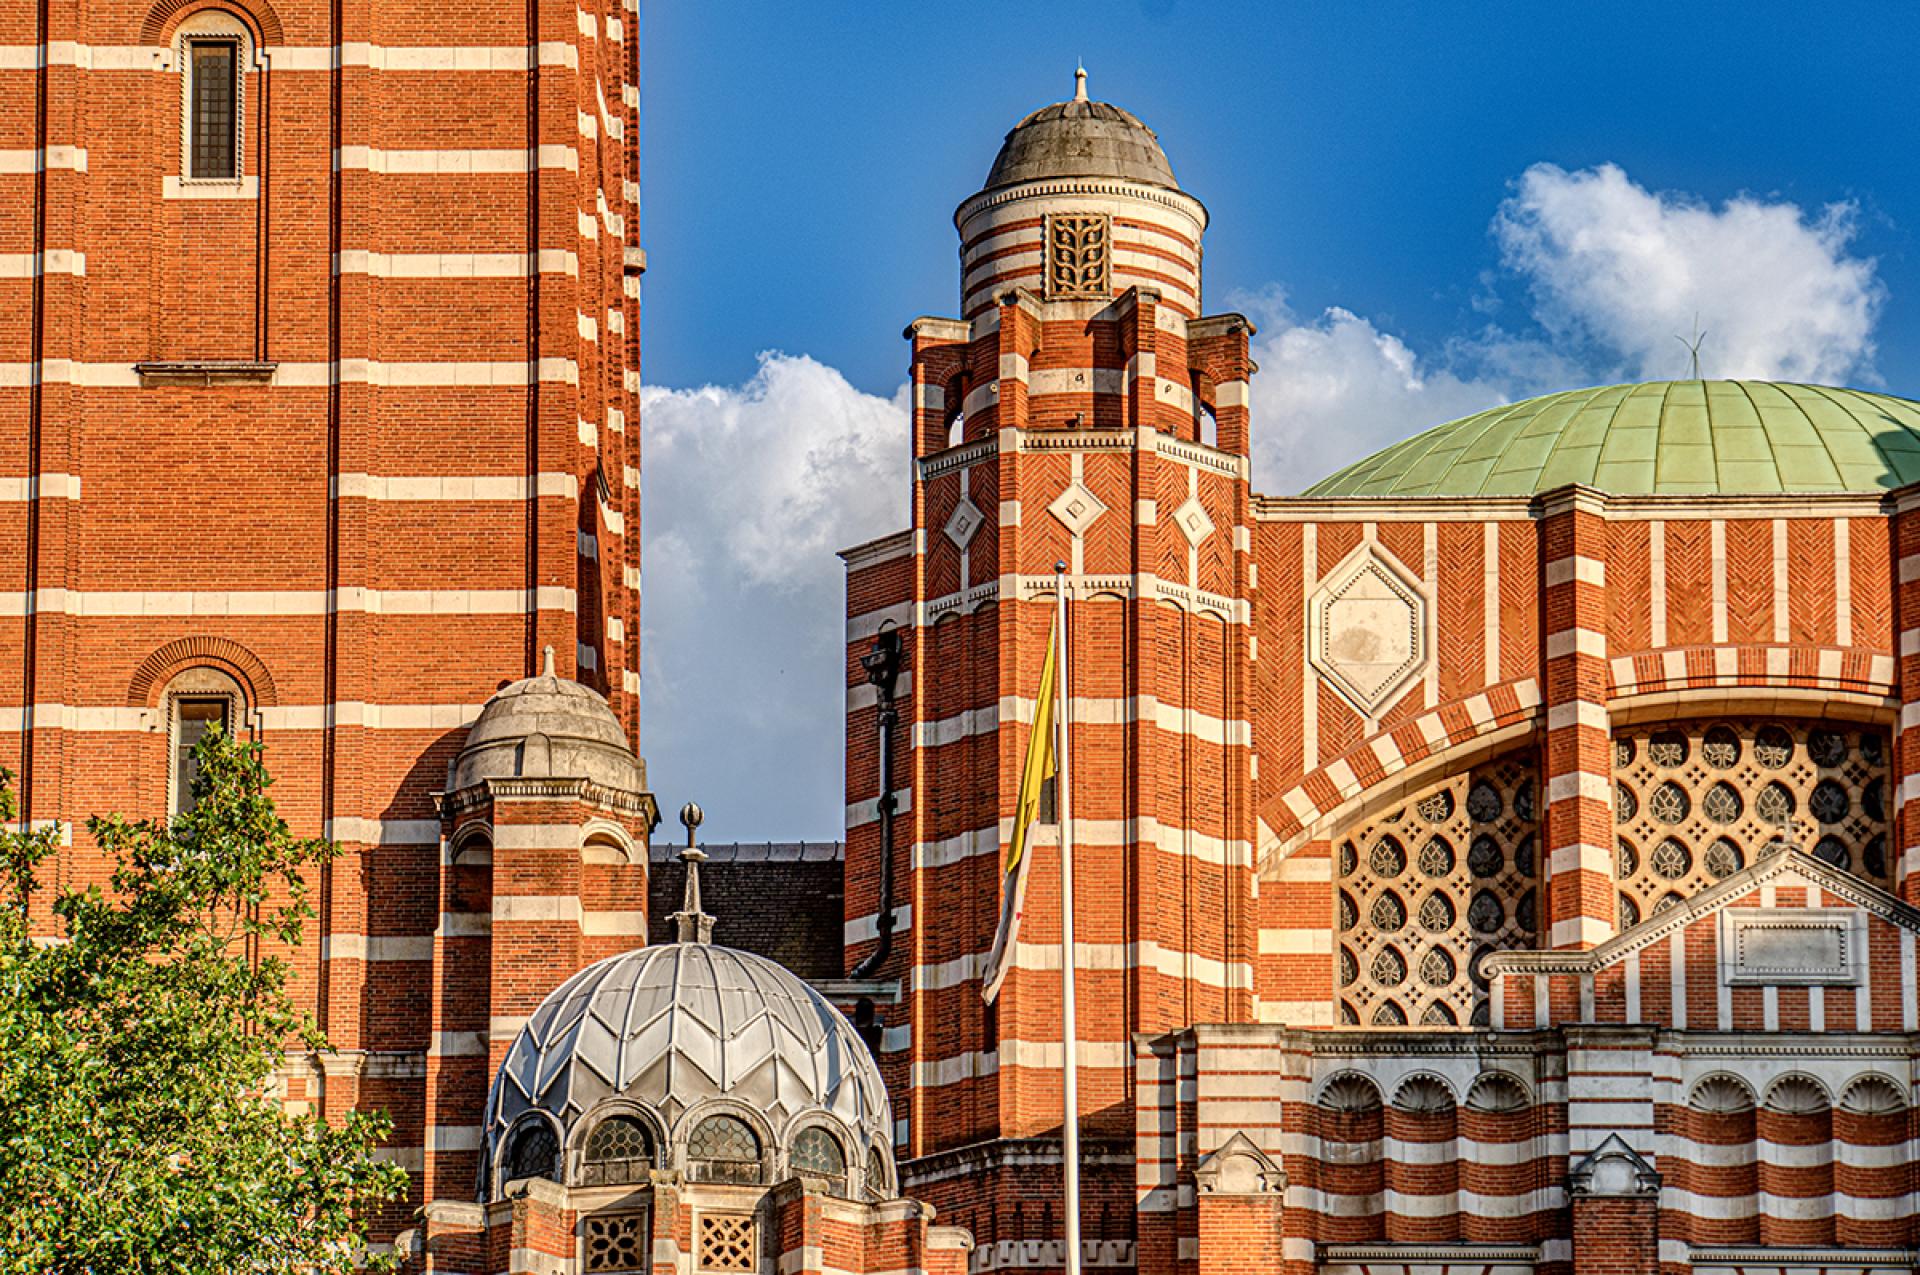 London Photography Awards Winner - Westminster Cathedral, London